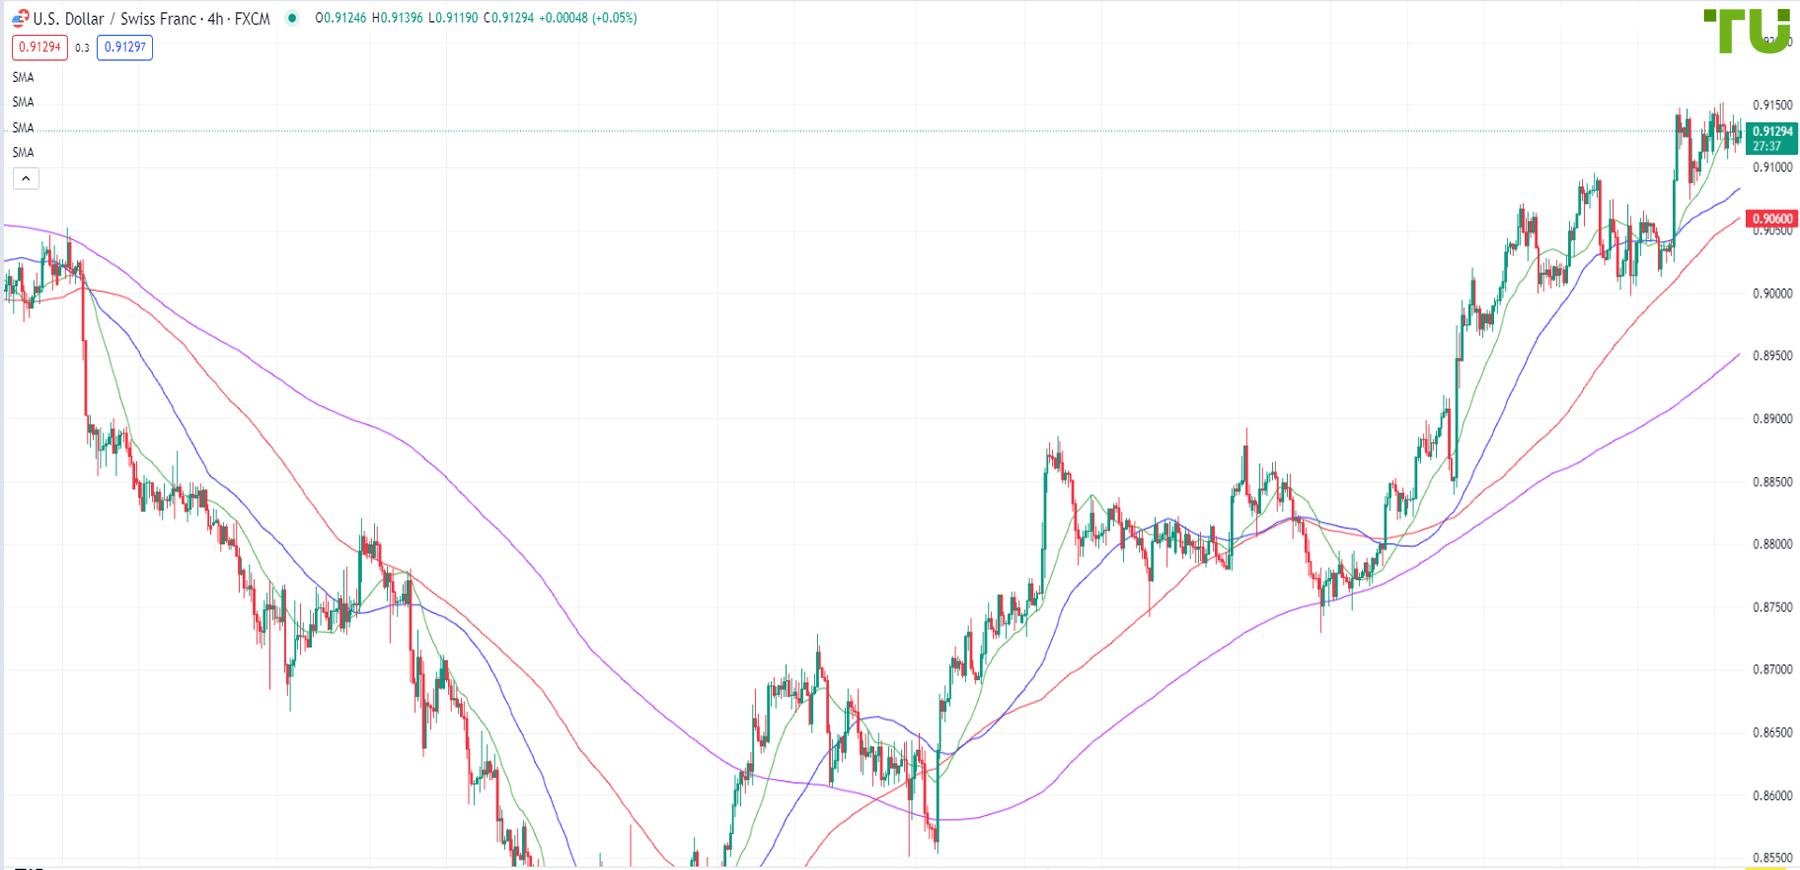 US Dollar/Swiss franc is consolidating in a narrow range